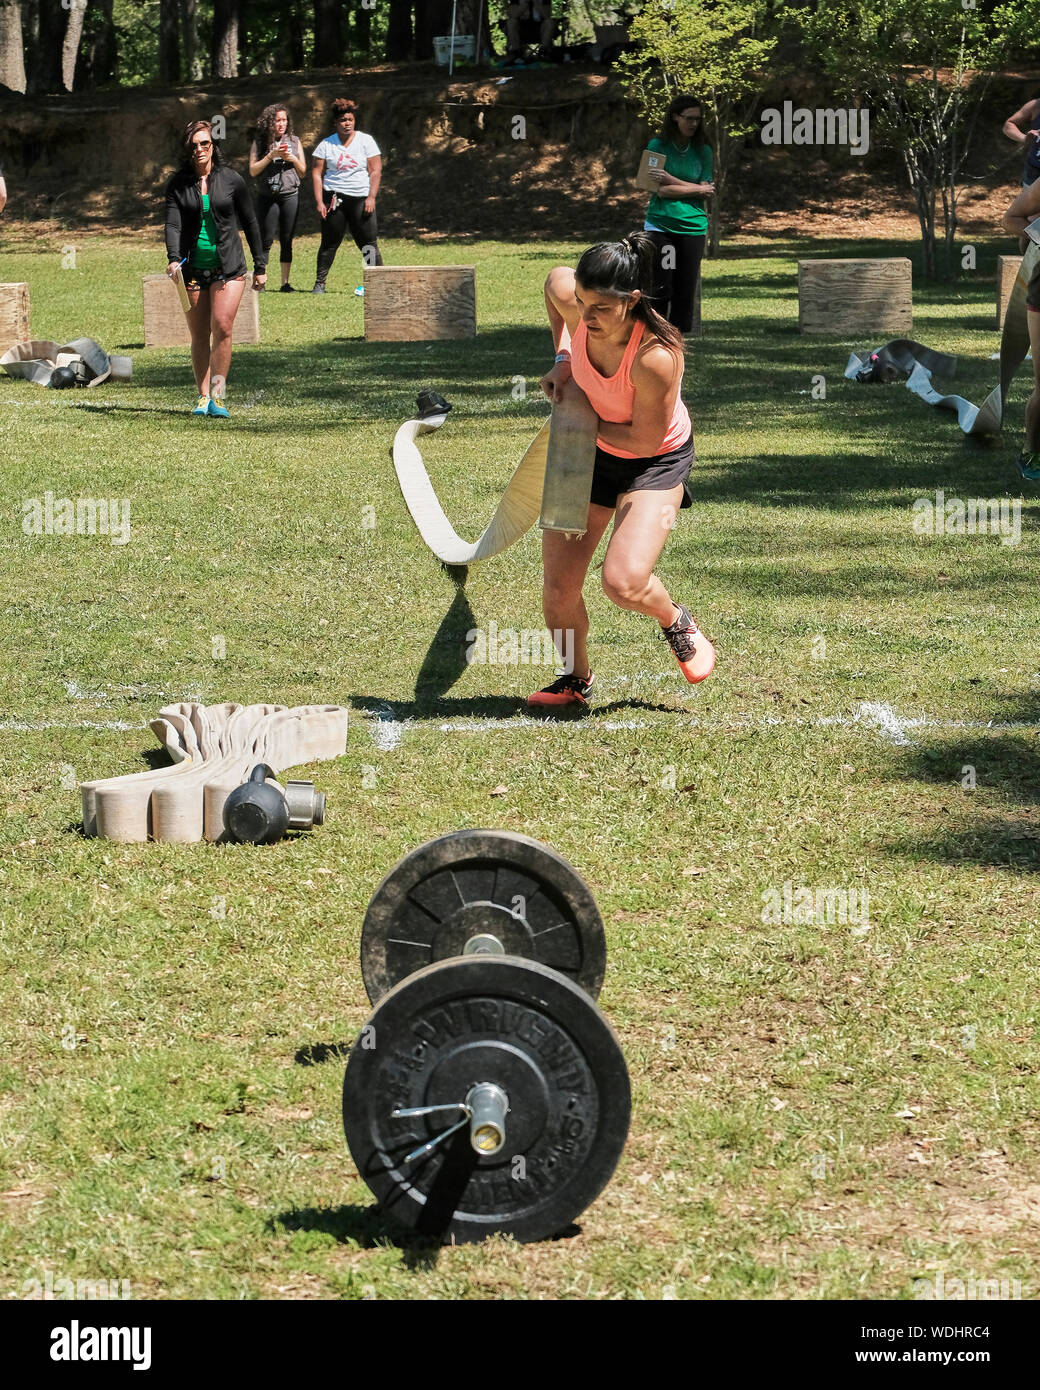 Female or woman competing in a CrossFit fitness challenge competition  to exhaustion outdoors in Wetumpka Alabama, USA. Stock Photo